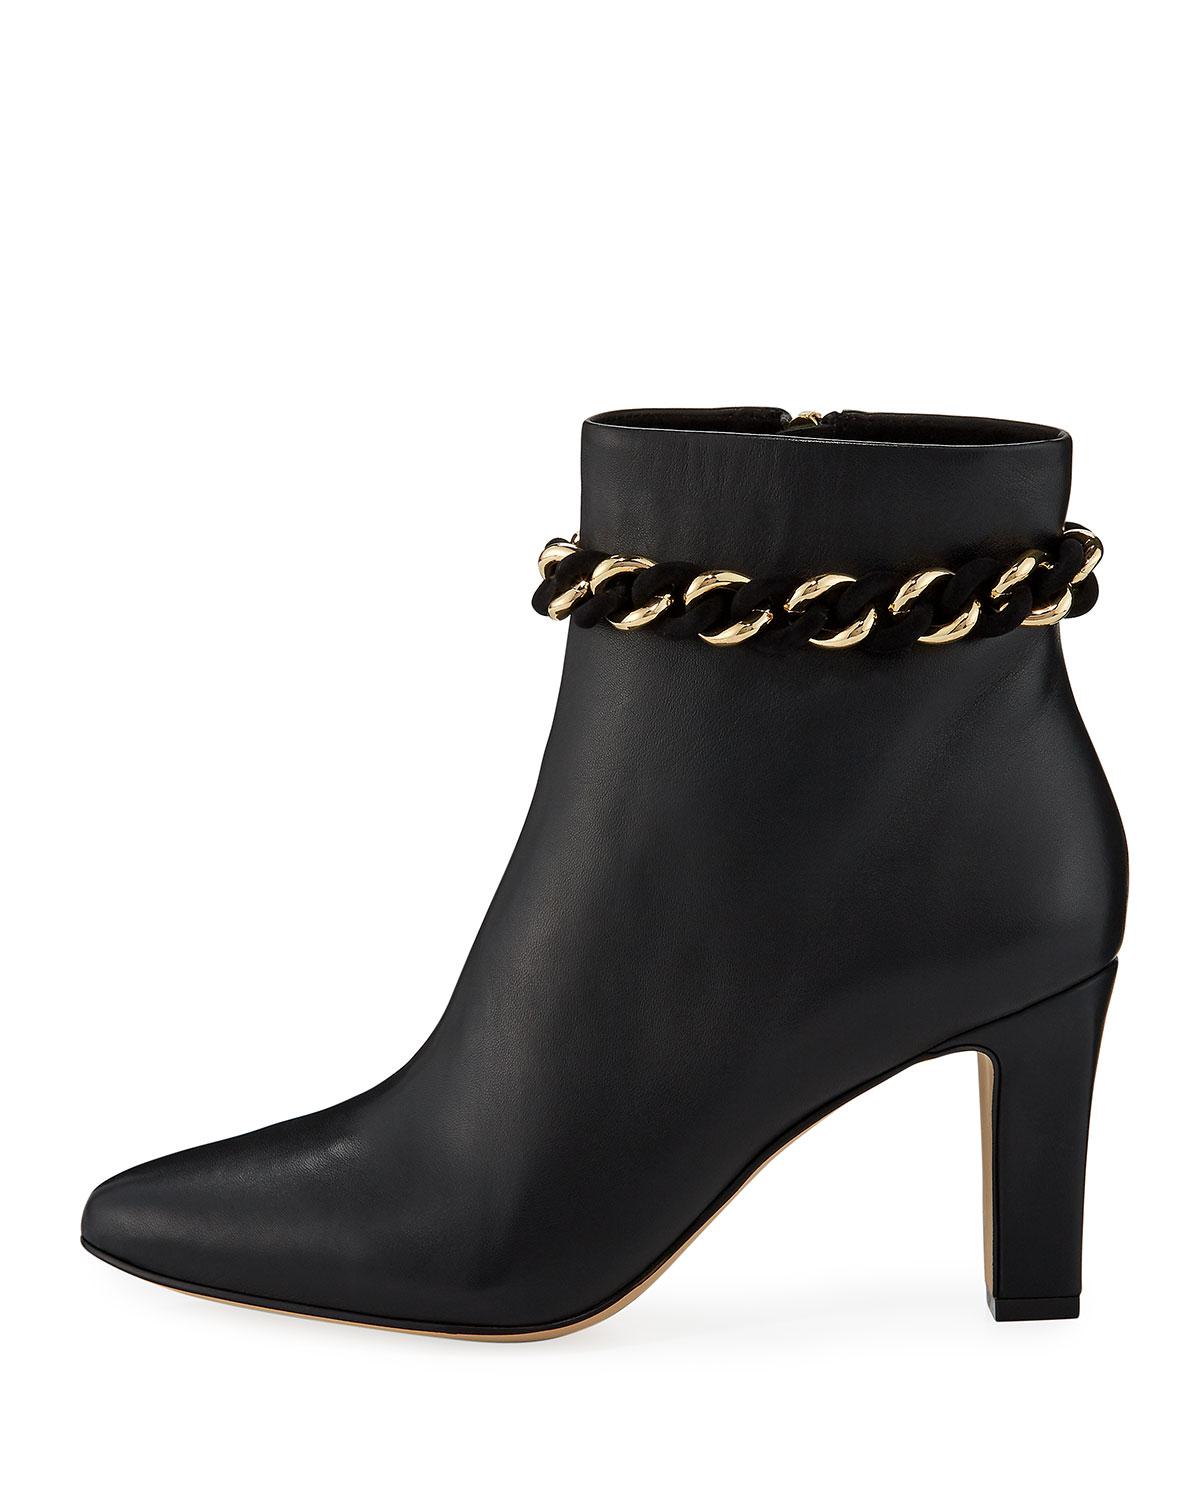 Karl Lagerfeld Leather Maggie Heeled Chain Bootie in Black - Lyst